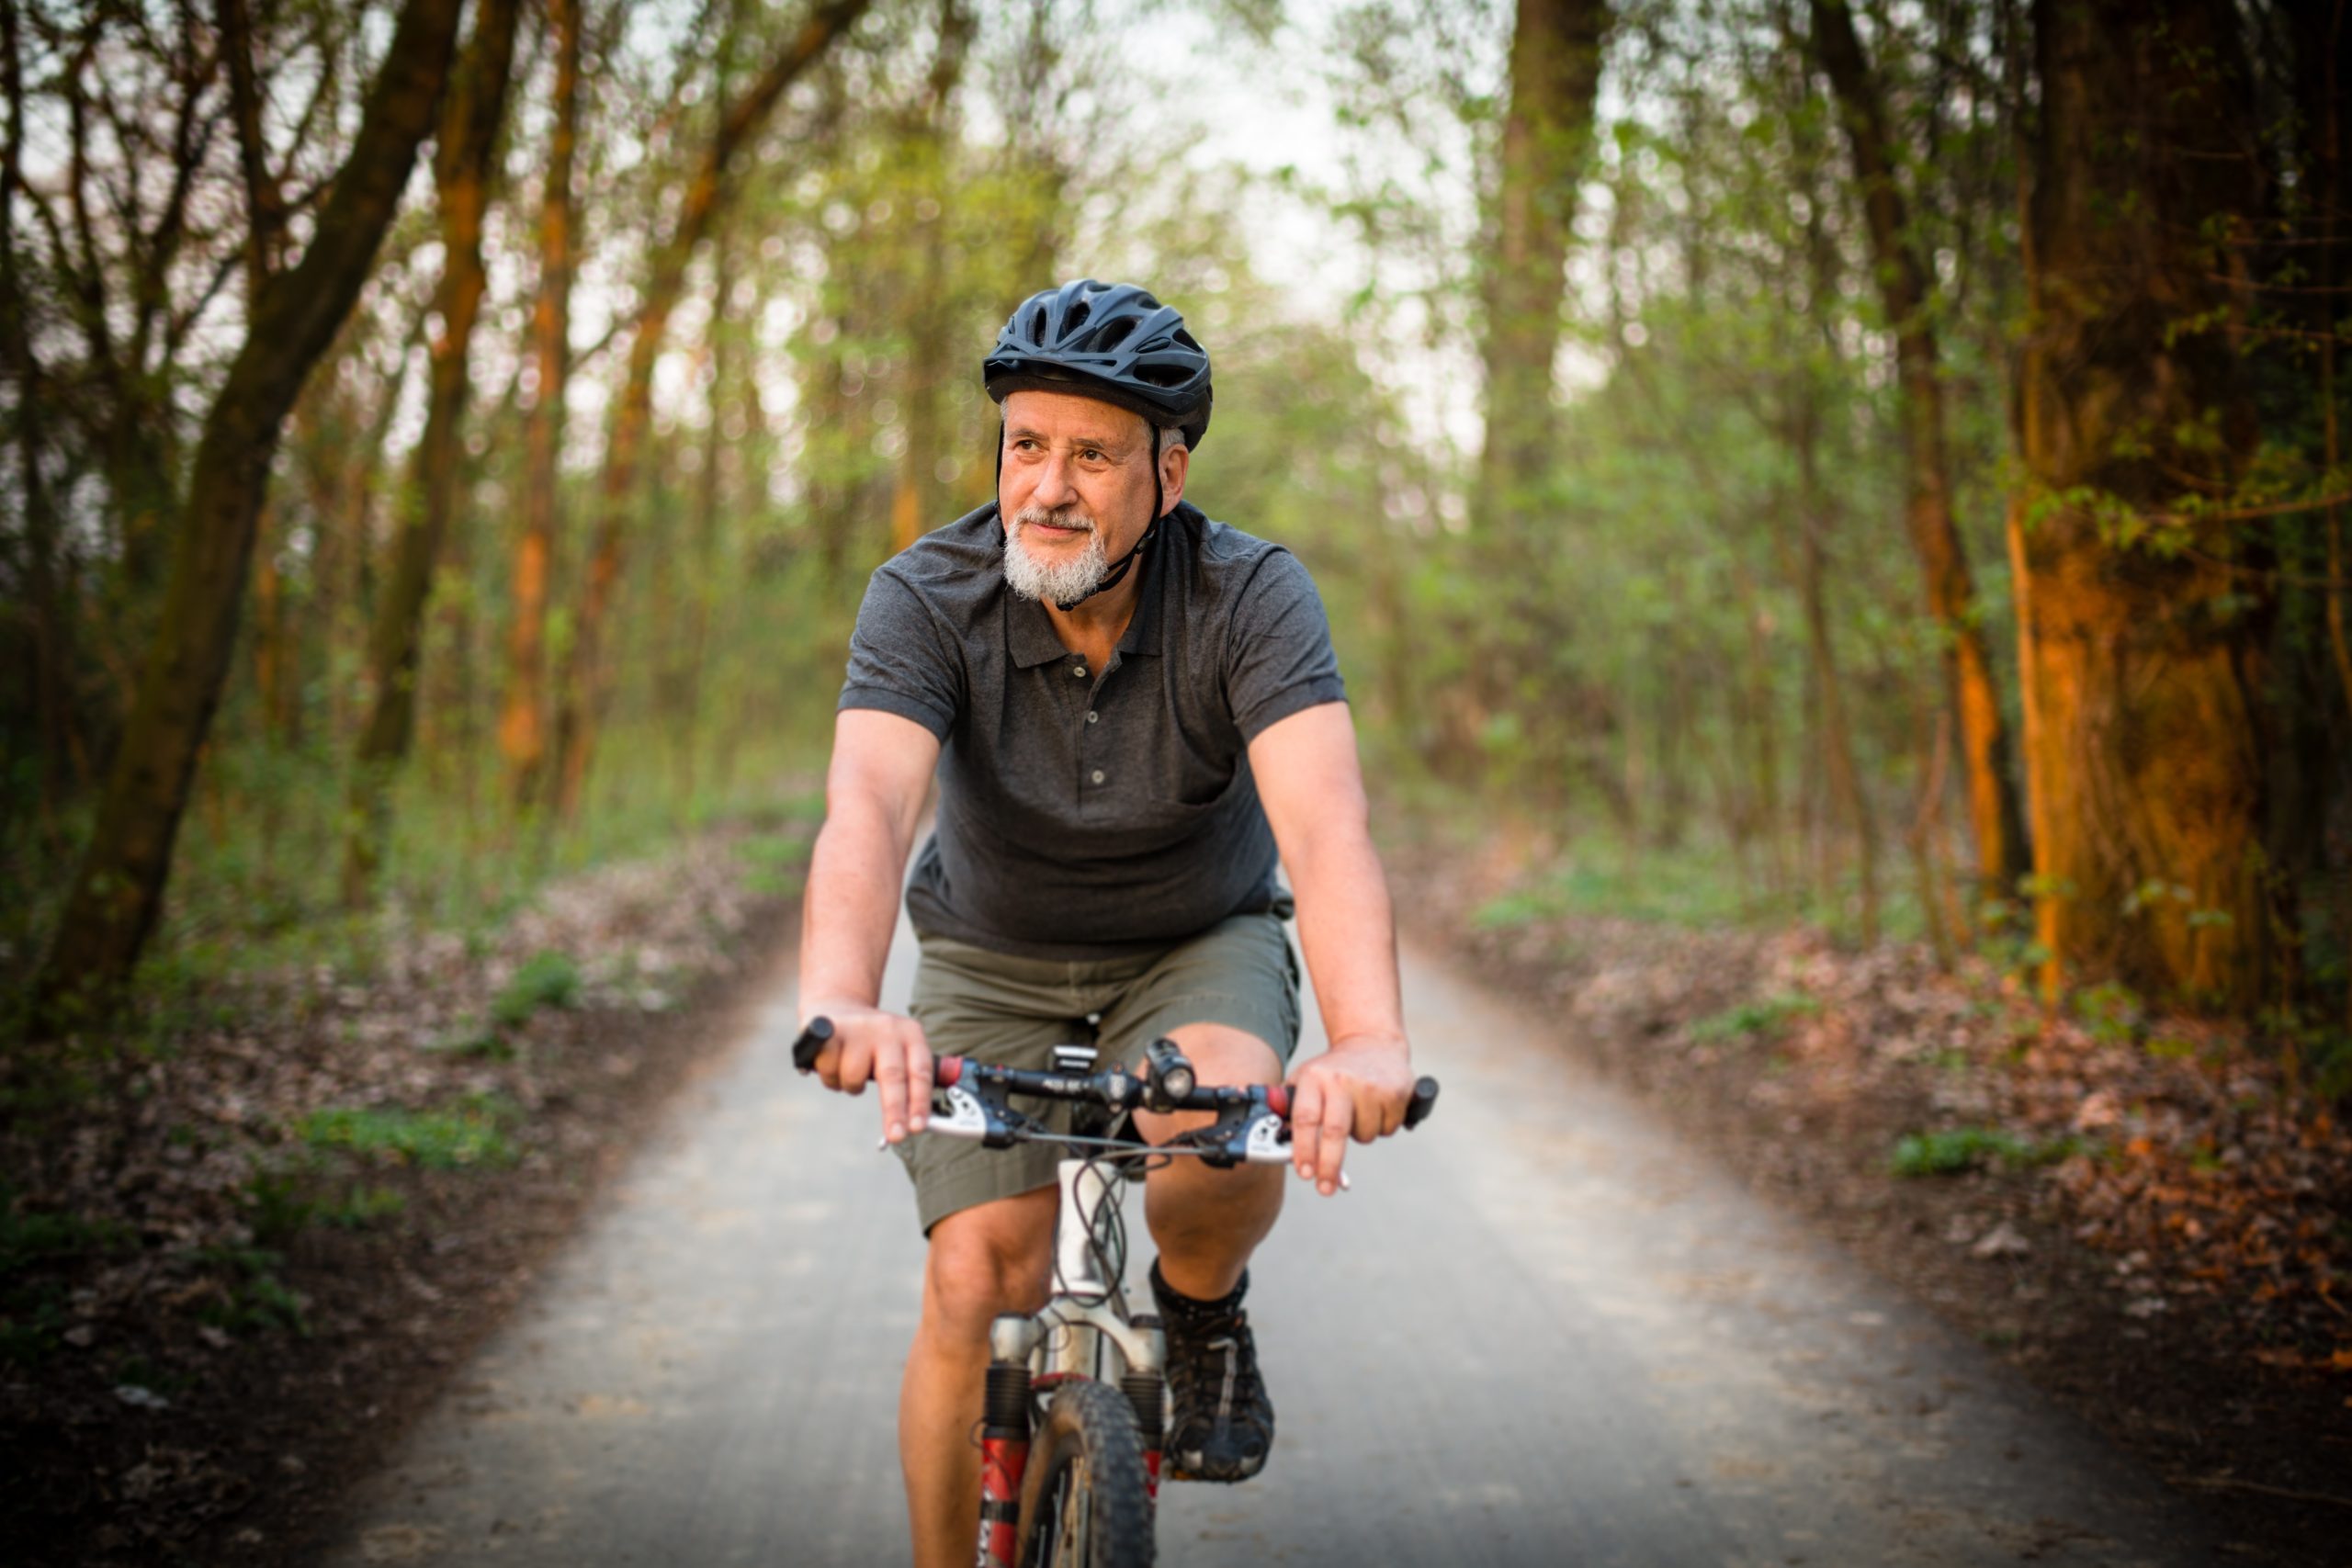 elderly man smiling while riding a bike and wearing a helmet